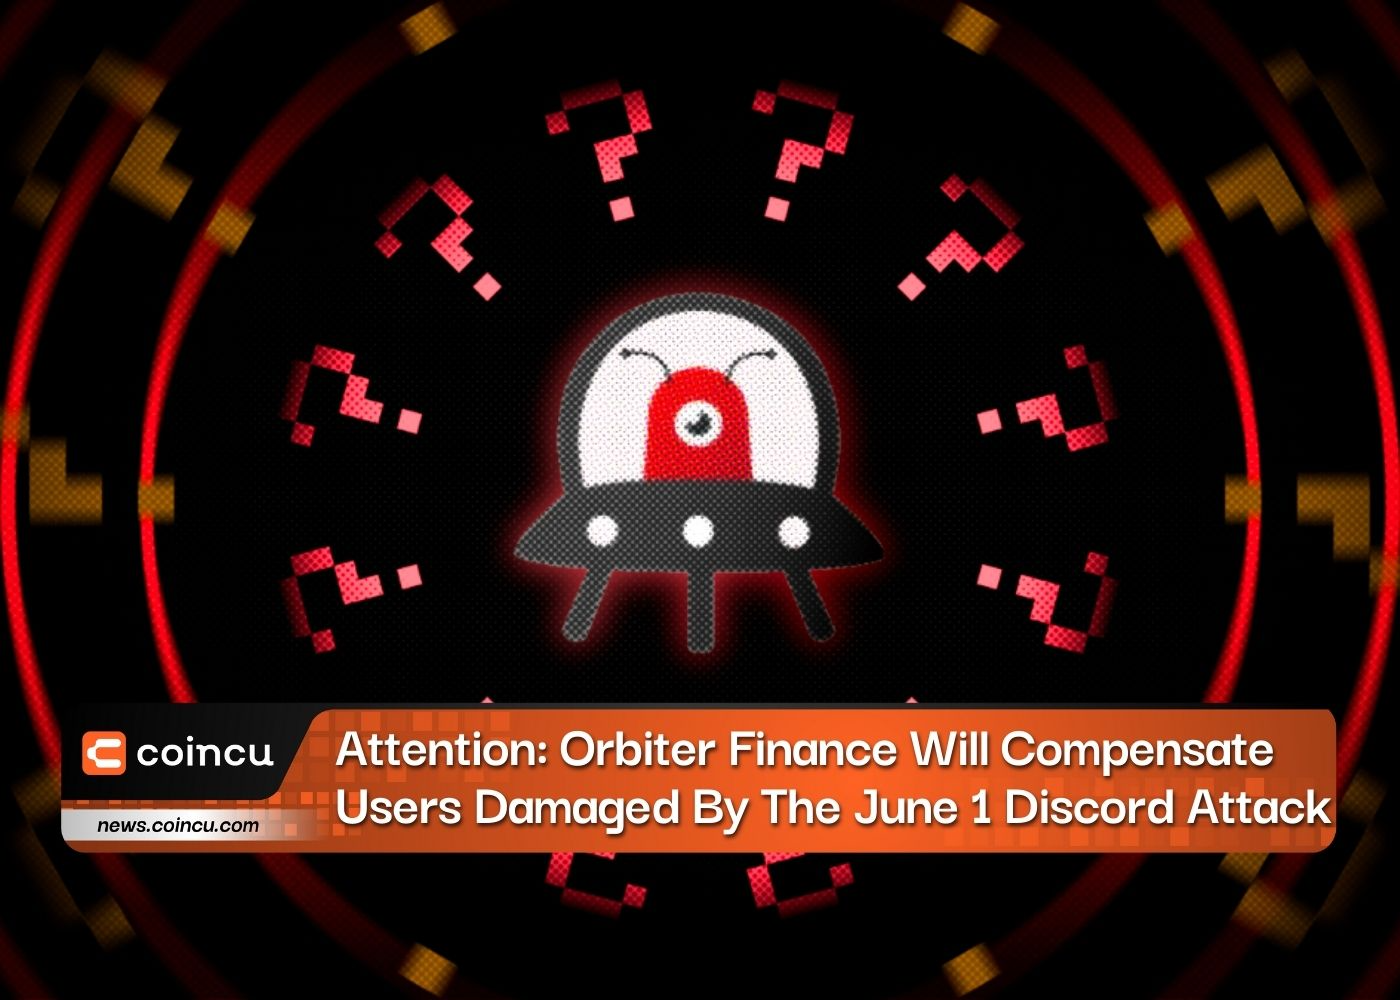 Attention: Orbiter Finance Will Compensate Users Damaged By The June 1 Discord Attack